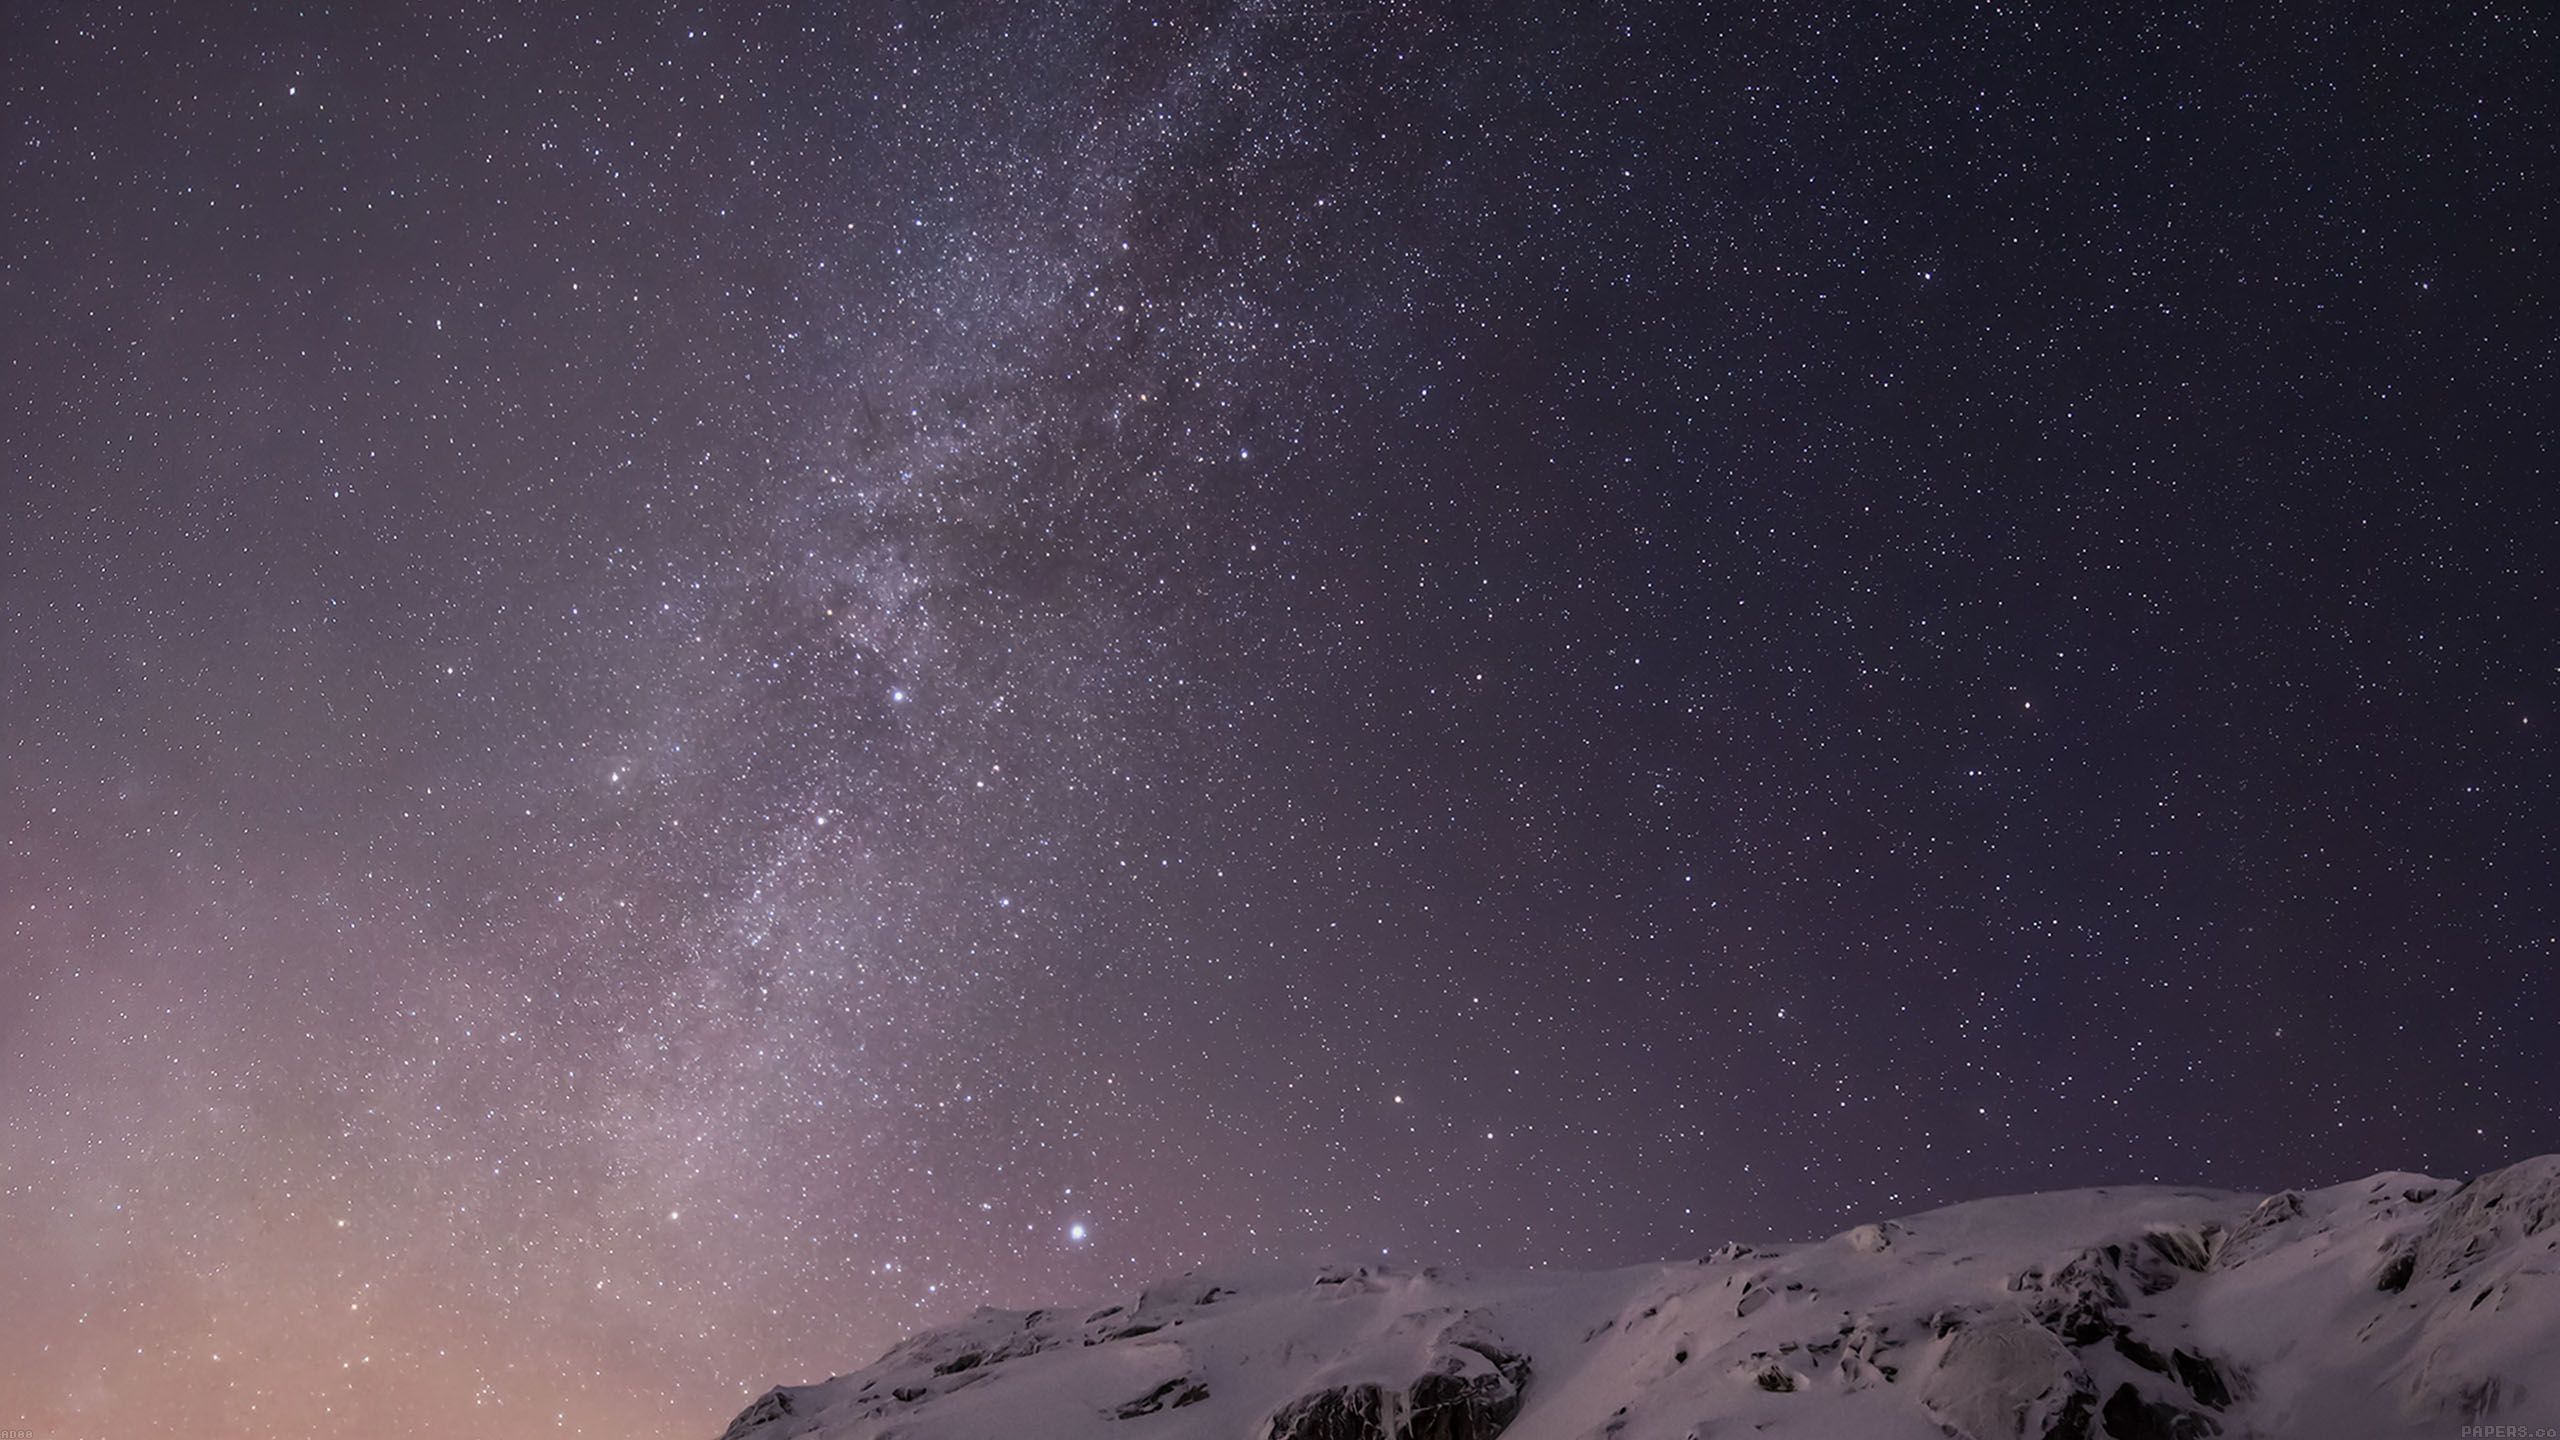 Desktop - Post your best non official OS X Yosemite wallpapers